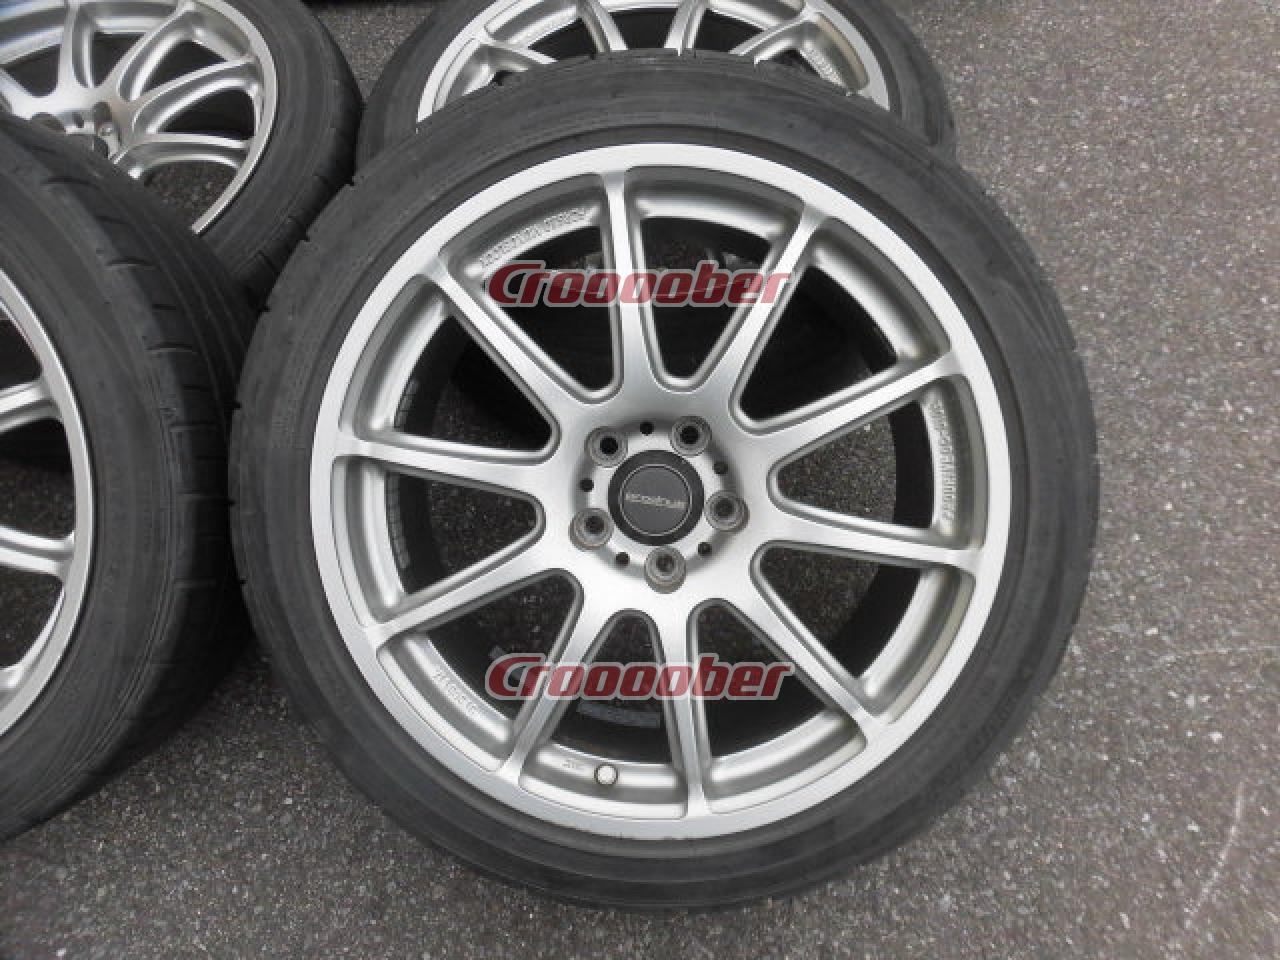 16 x 7. inches /5 x 114 mm, 45 mm Offset Multiple Manufactures STL62480U45 Black Wheel with Painted and Meets All Federal Motor Safety Standards